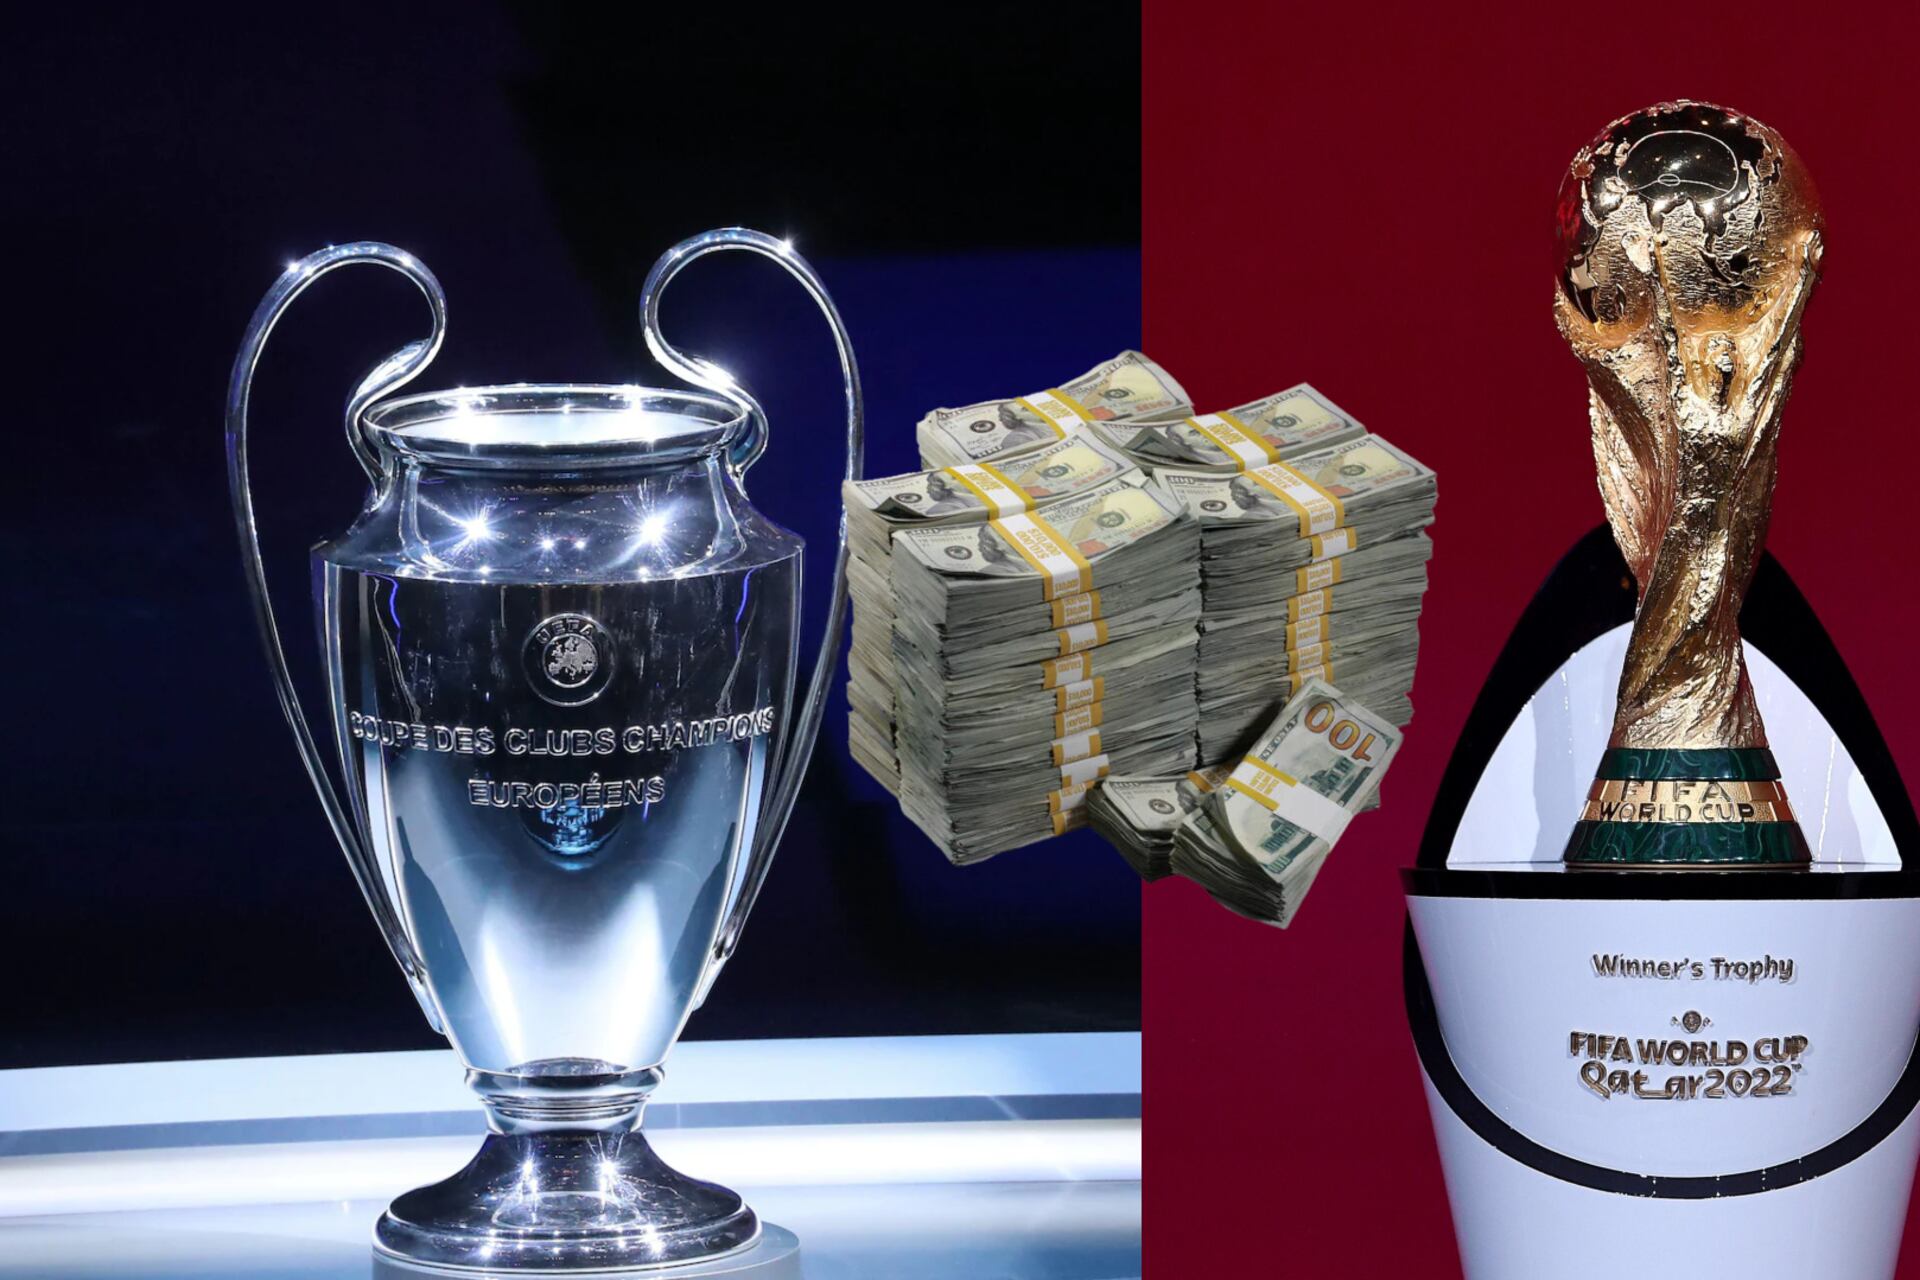 While the Champions League trophy is $15k, World Cup is worth the most